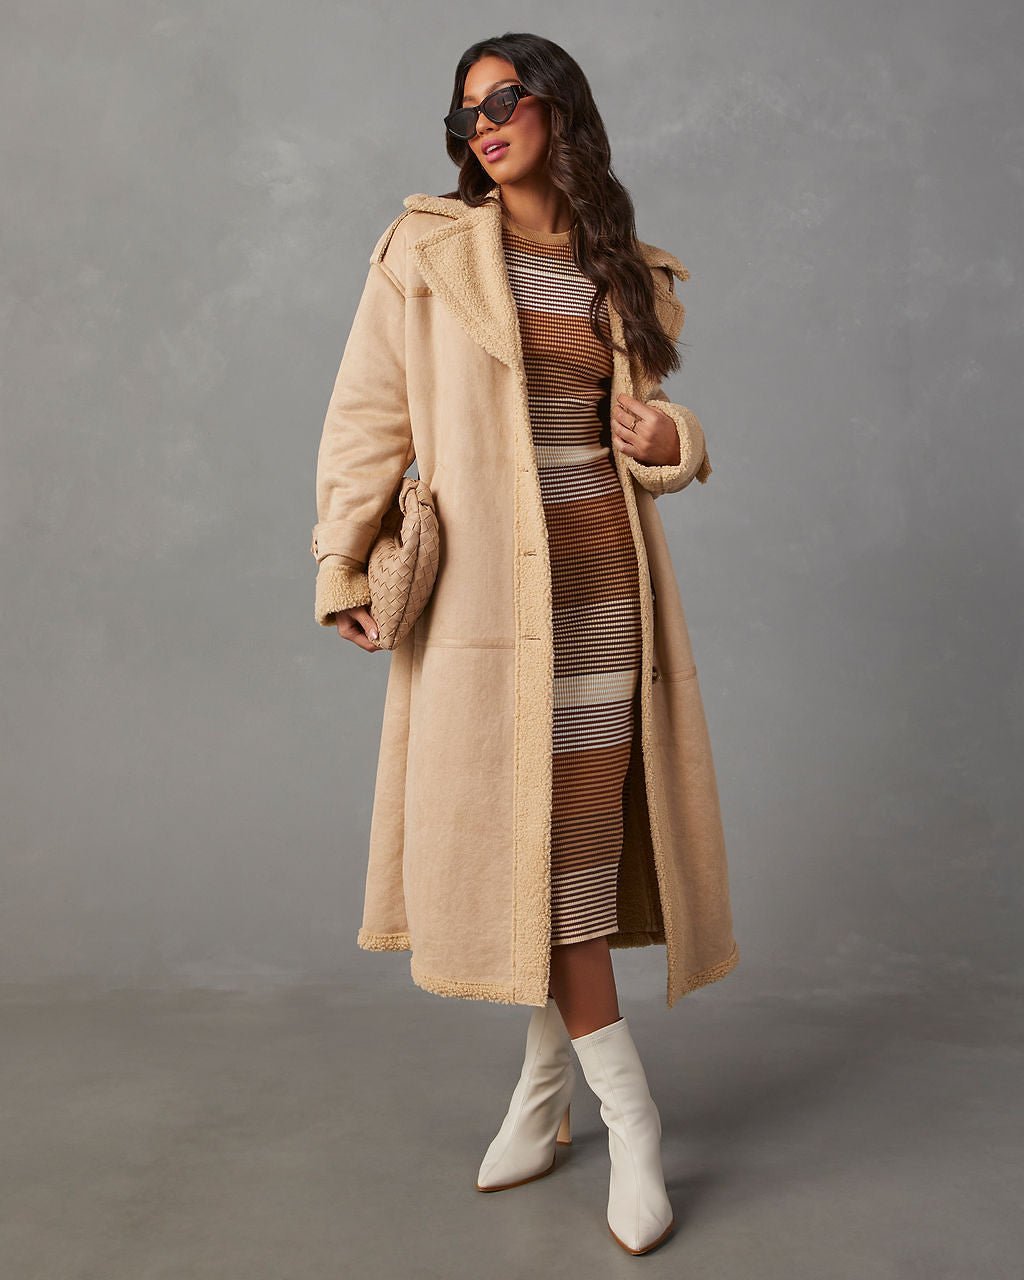 

Hobbes Sherpa Lined Suede Pocketed Coat